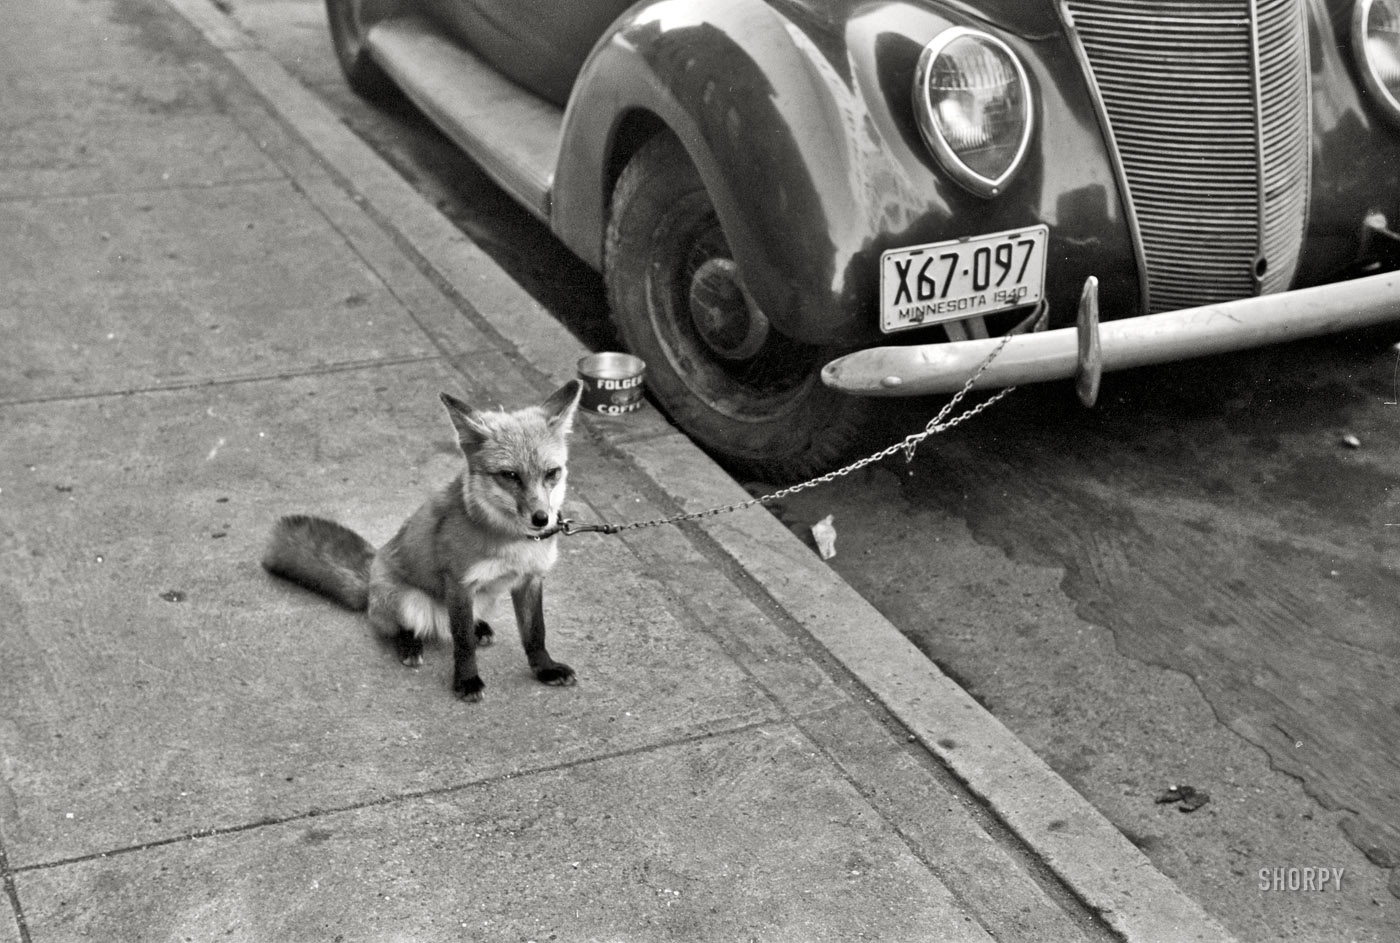 October 1940. Moorhead, Minnesota. "Fox chained to automobile." 35mm negative by John Vachon for the Farm Security Administration. View full size.